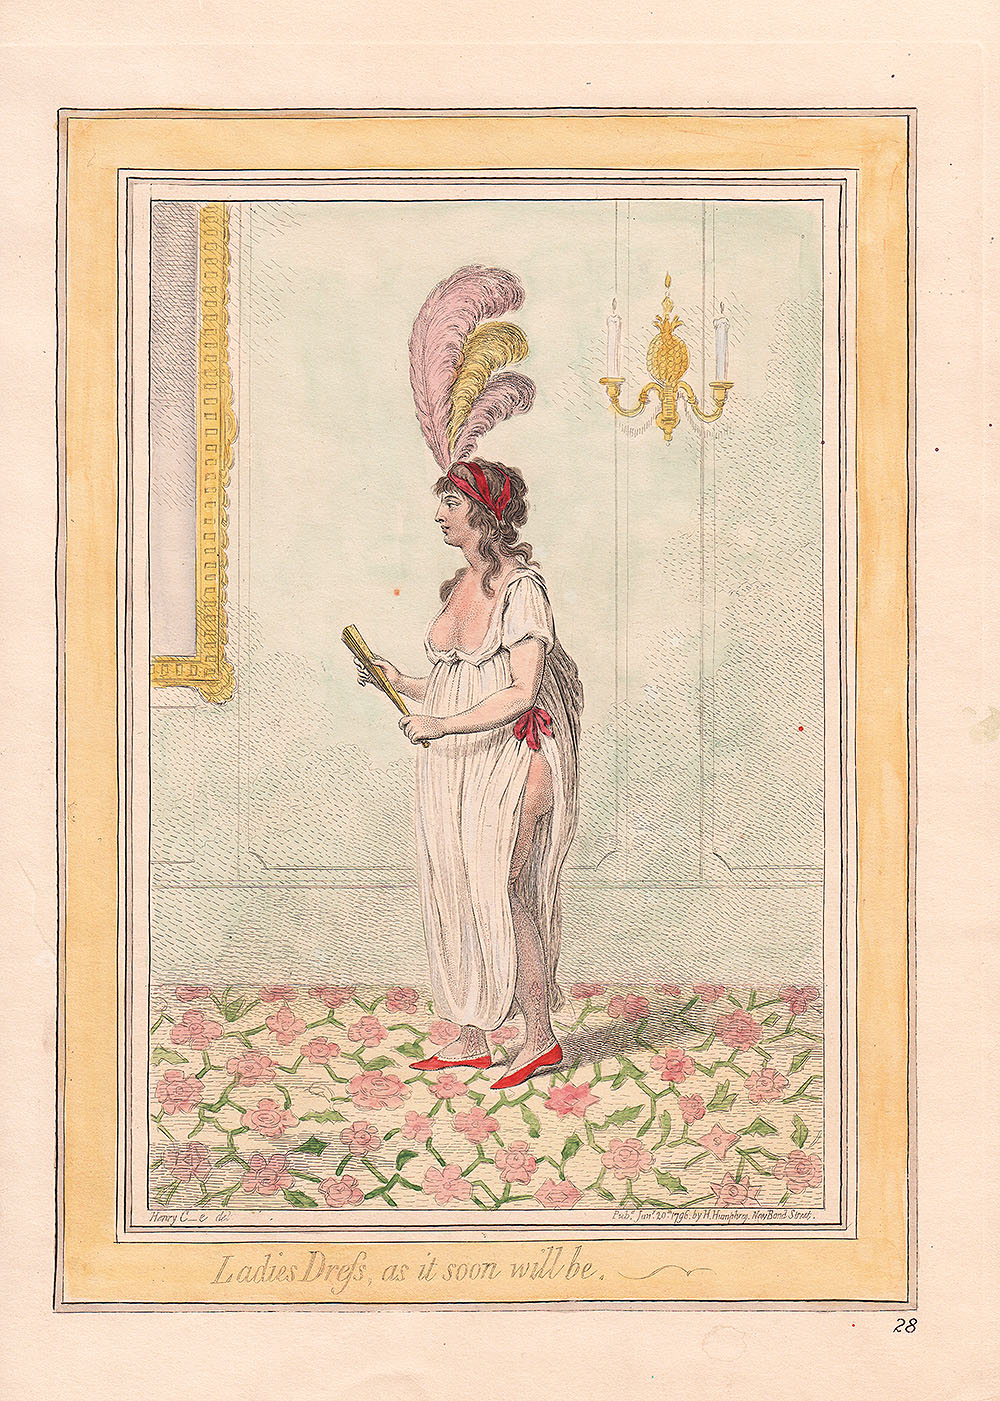 Gillray - Ladies Dress as it soon will be